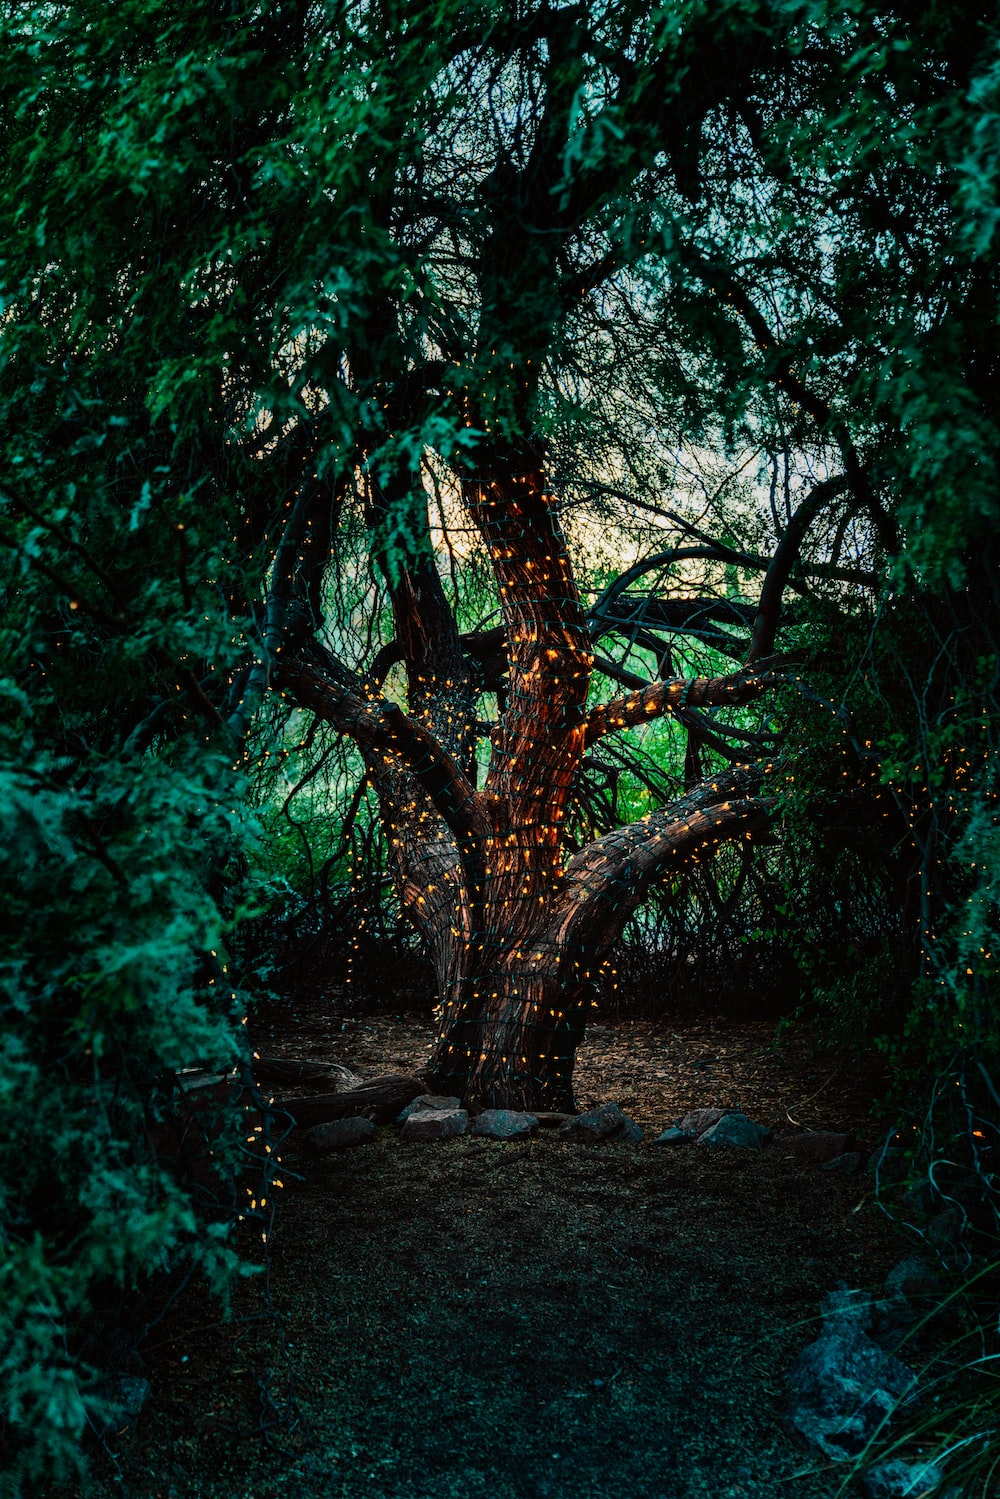 A tree in the forest with fairy lights wrapped around it - Magic